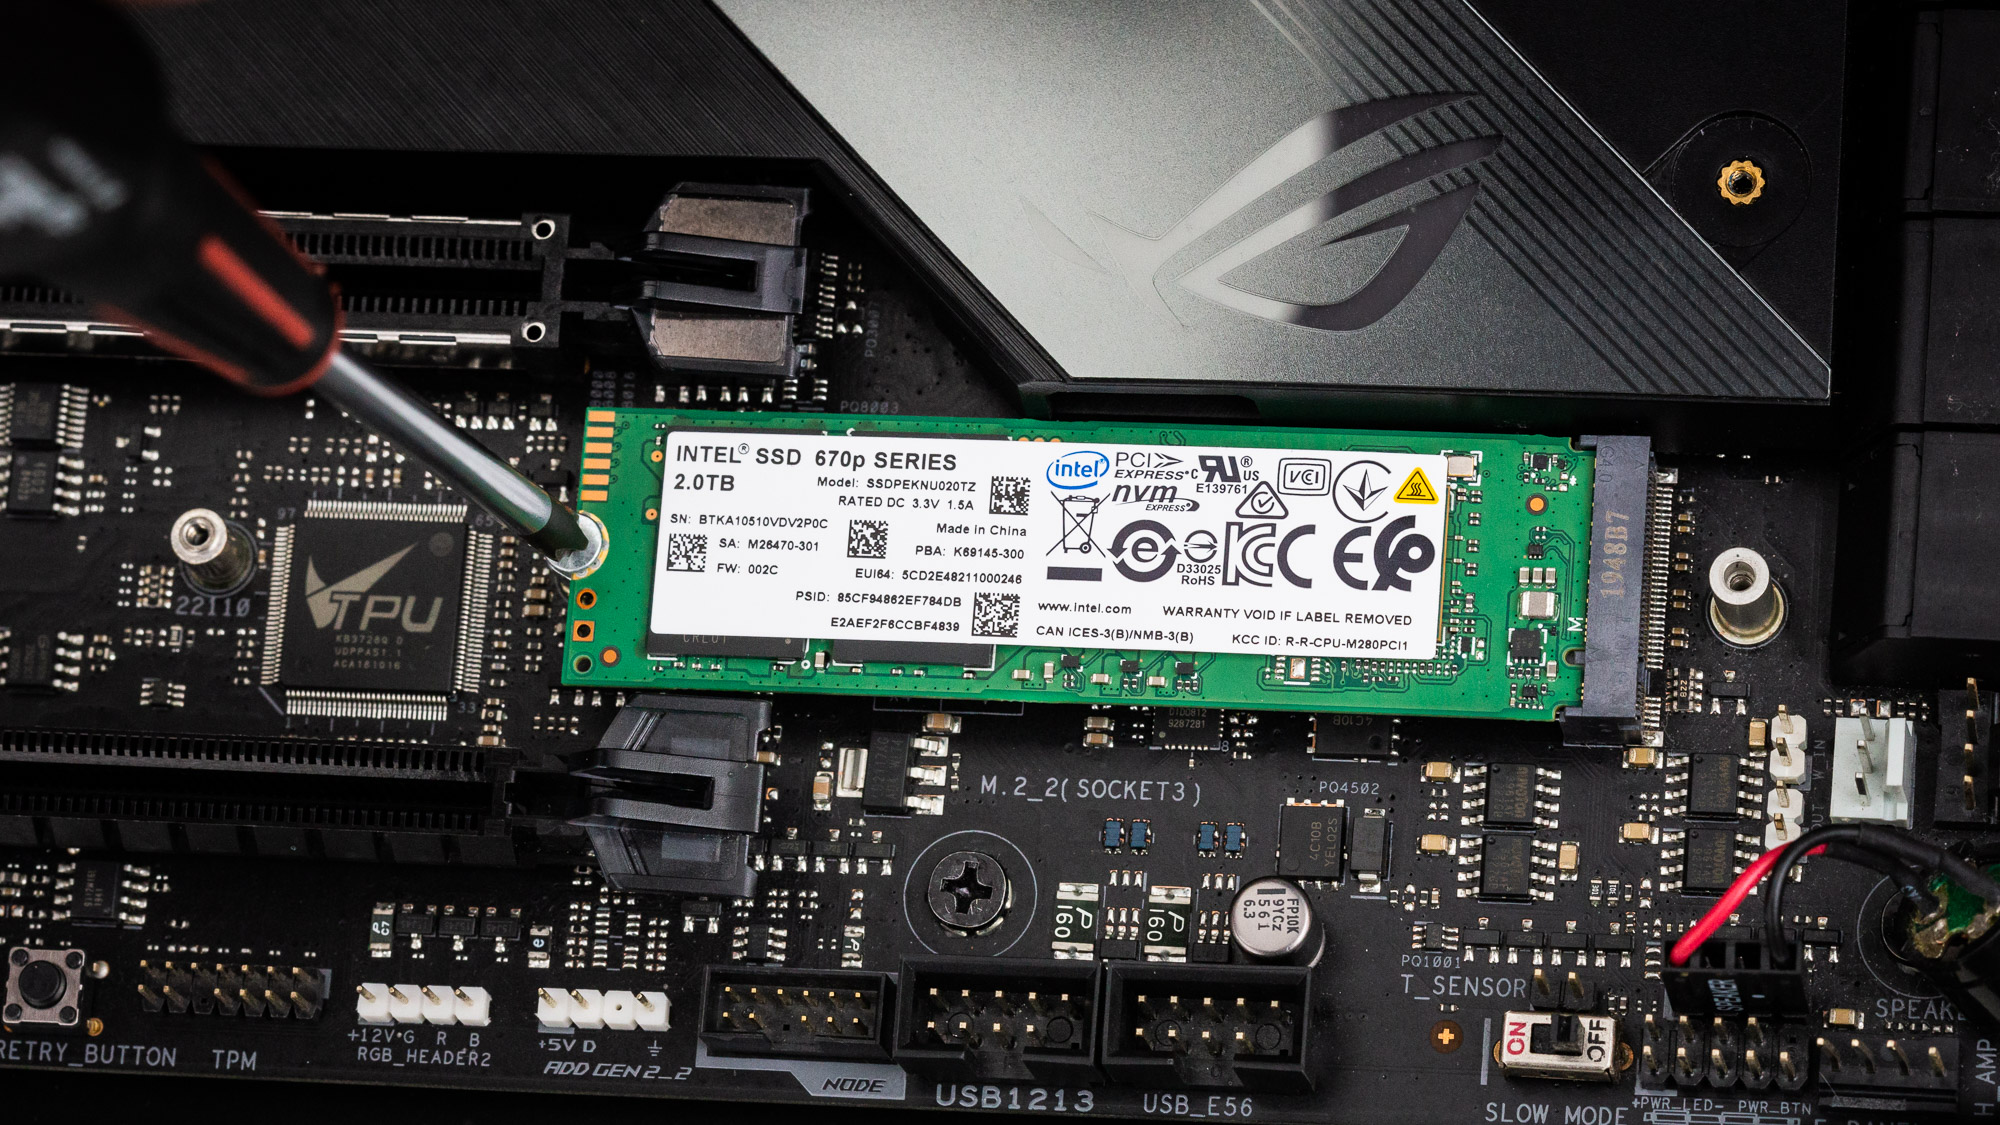 Intel SSD 670p M.2 NVMe SSD Review: Scaling to Higher Heights | Tom's Hardware